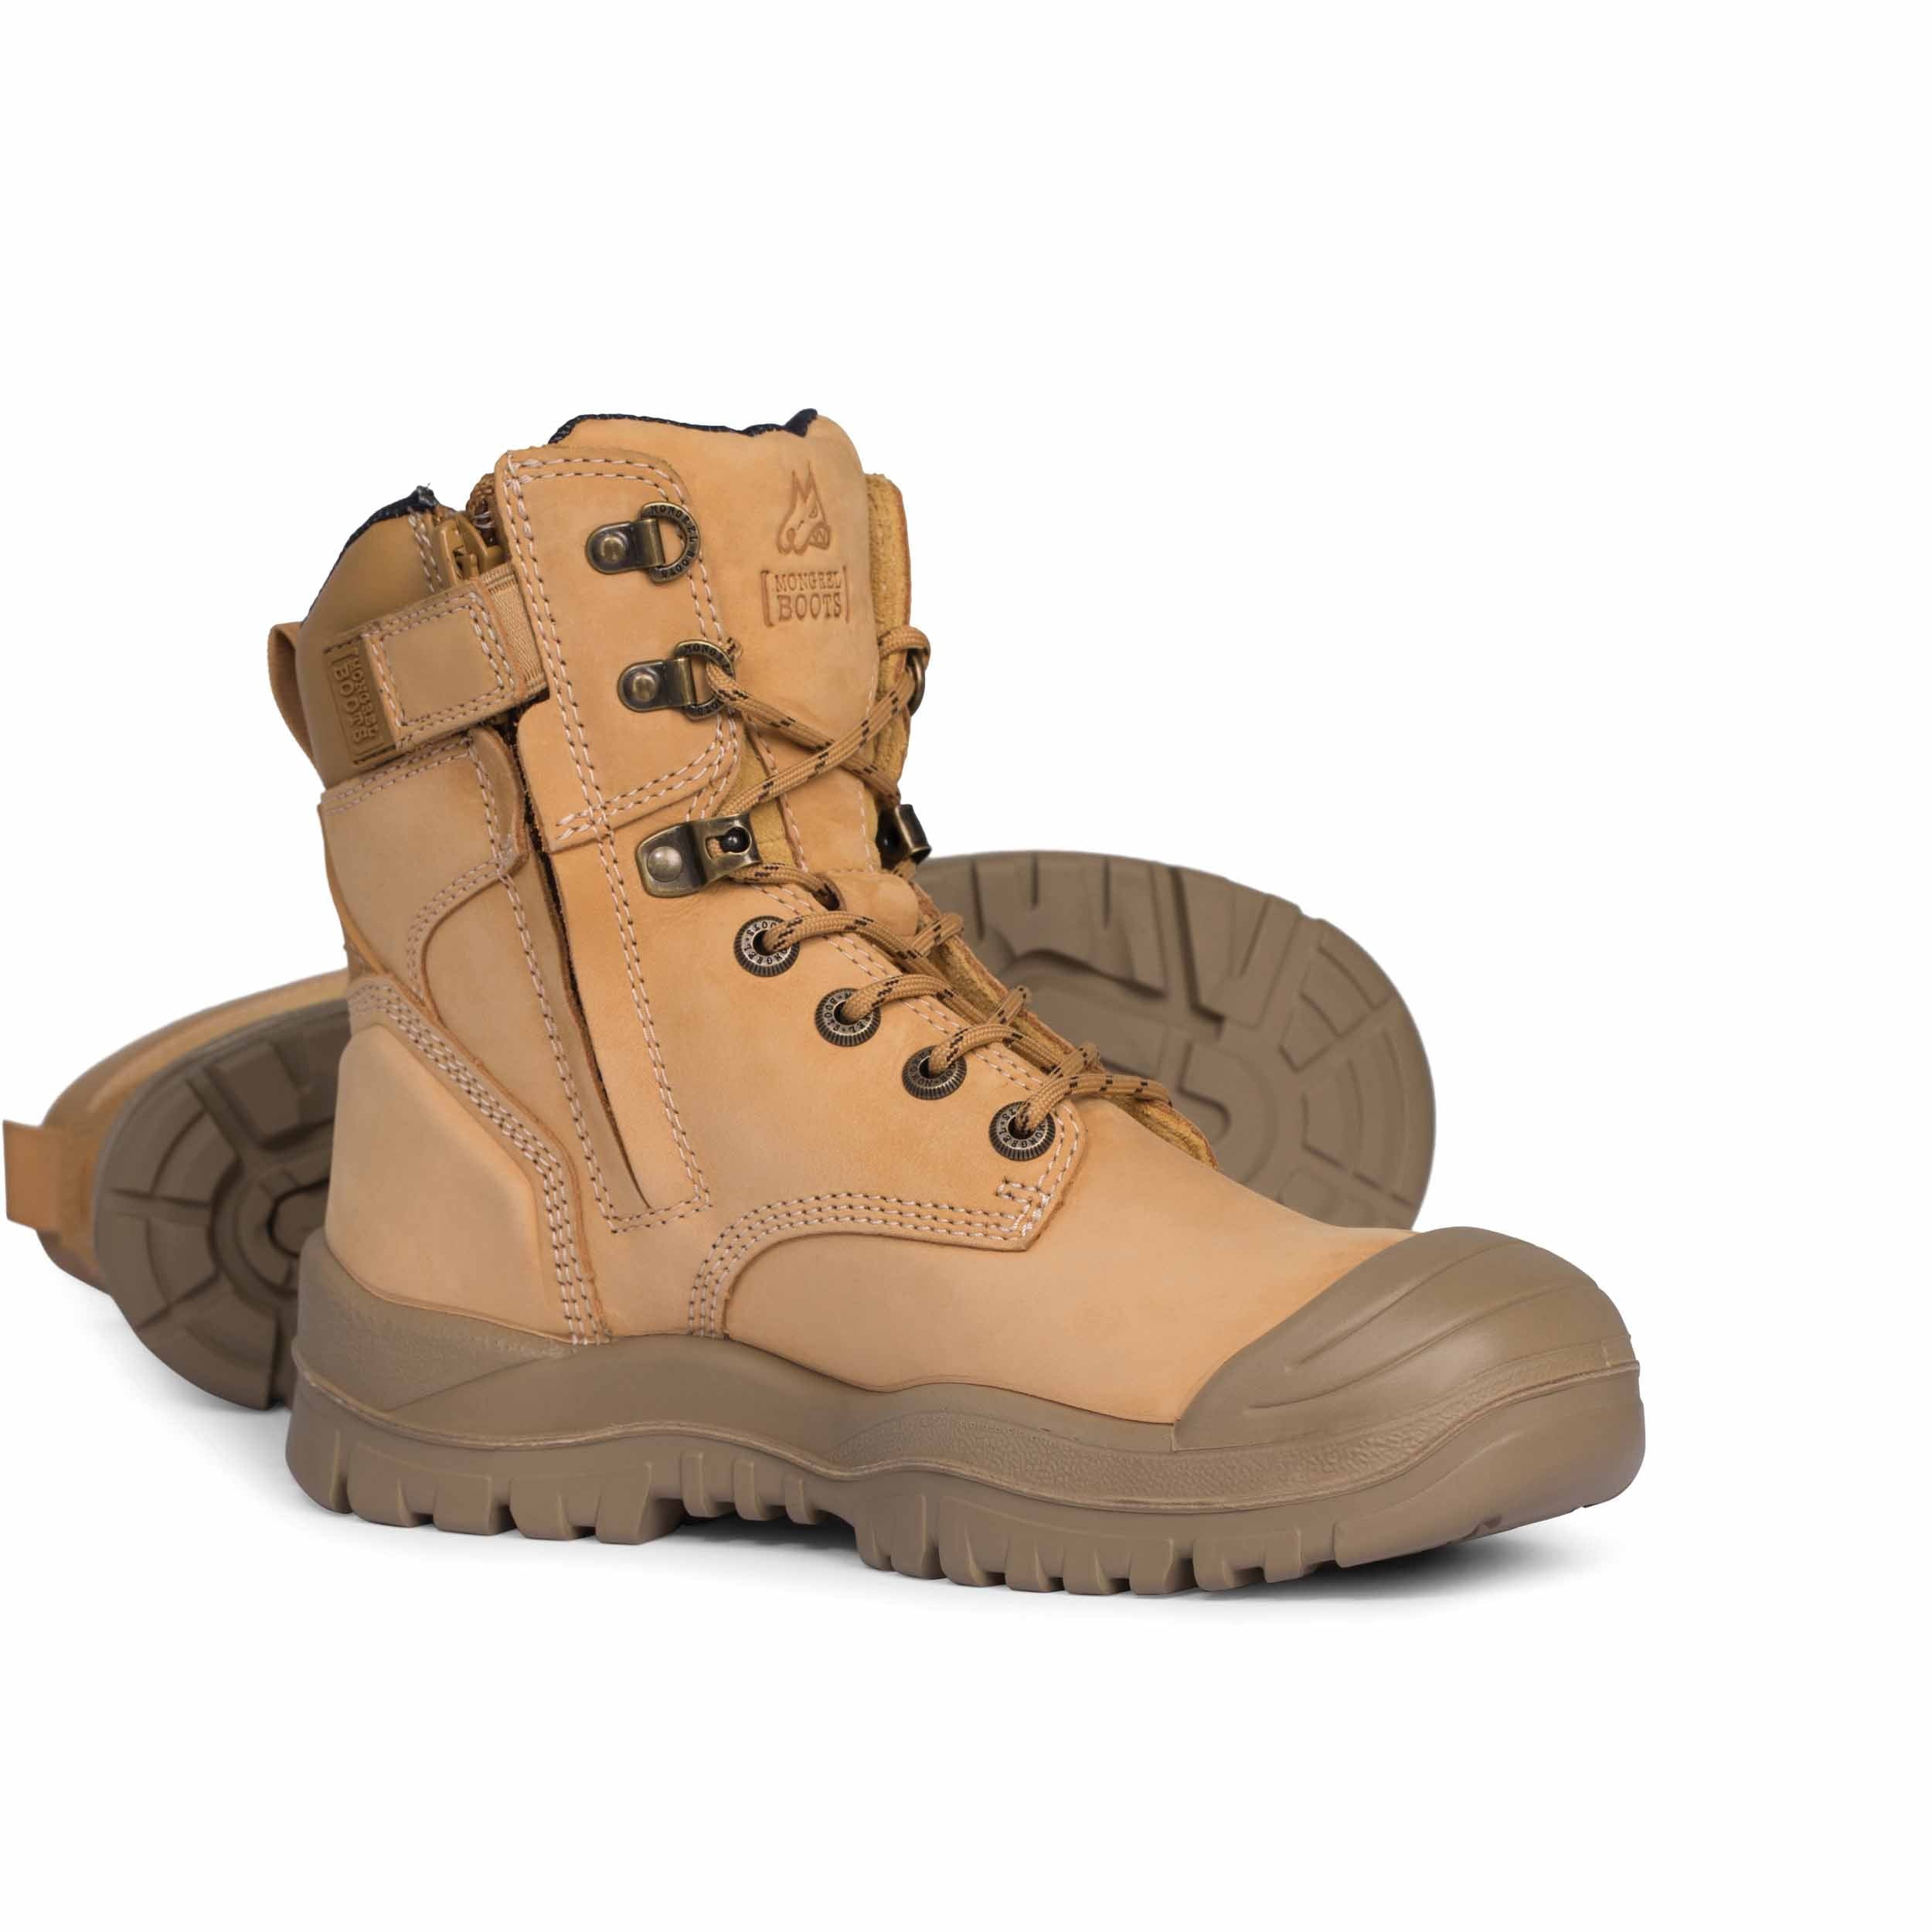 Mongrel 561050 Wheat High Leg Zipsider Safety Boot With Scuff Cap